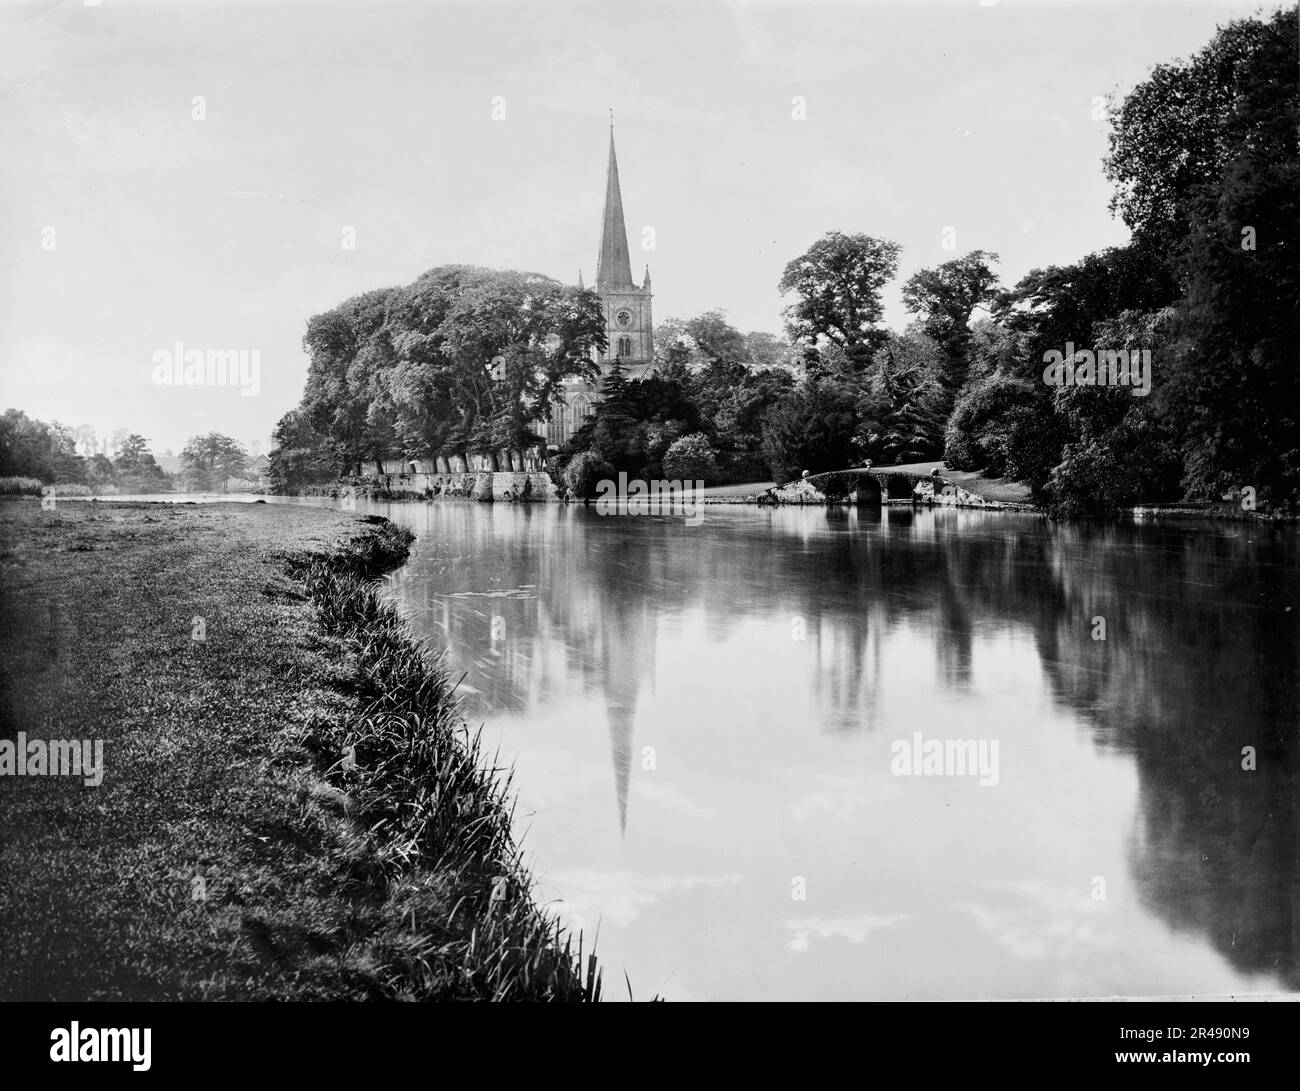 Trinity Church by River, Stratford-on-Avon, entre 1900 et 1910. Banque D'Images